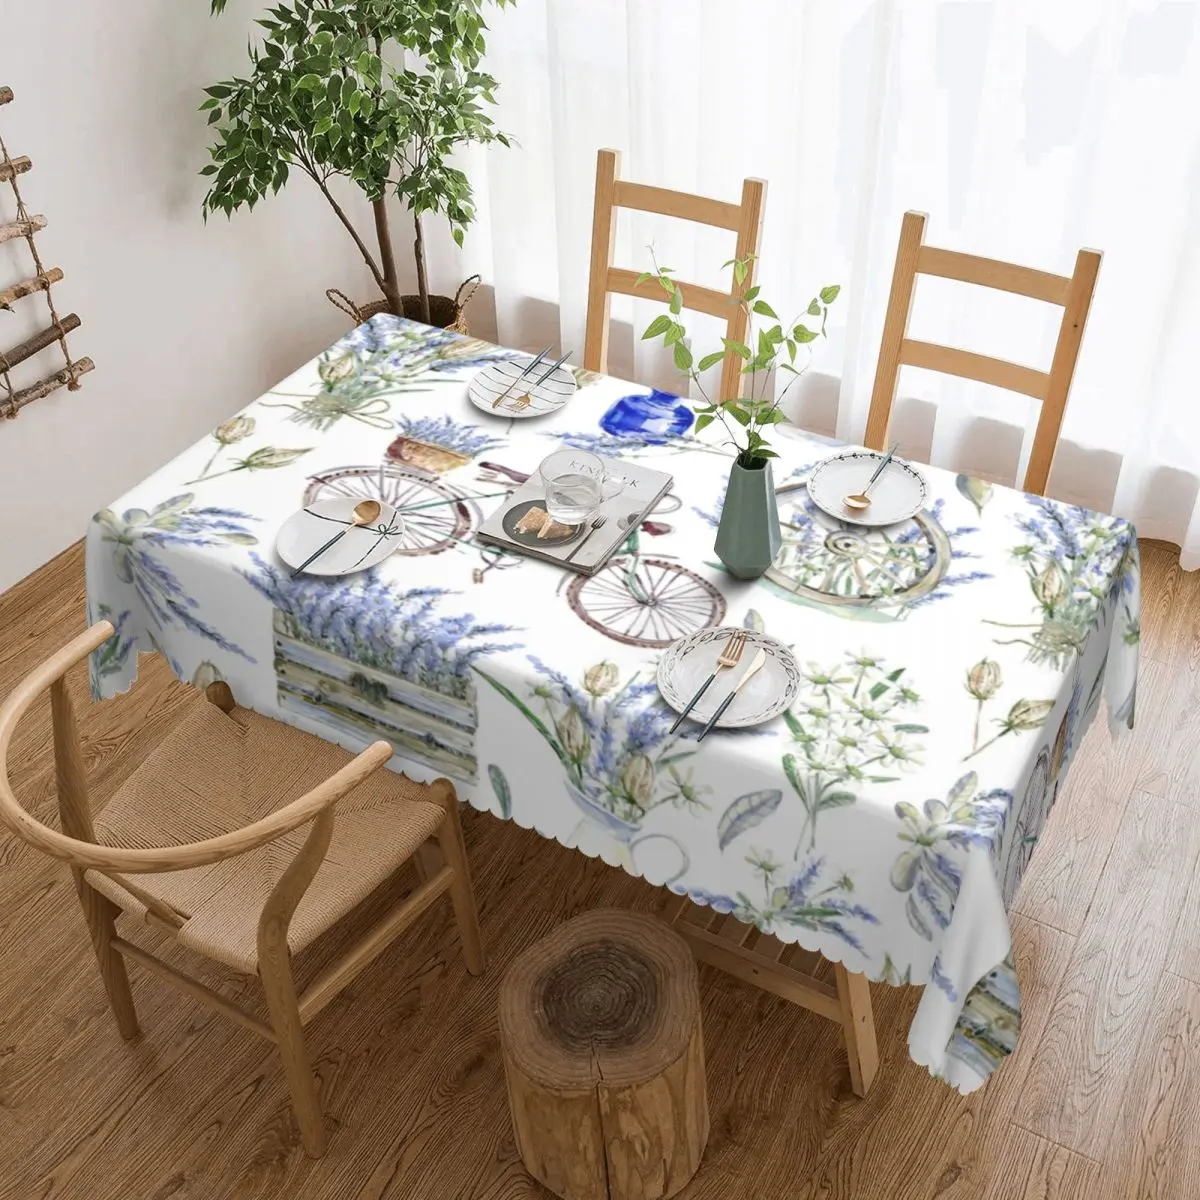 

Rectangular Waterproof Lavender Flower Pattern Table Cover Rustic Style Floral Table Cloth Tablecloth for Dining